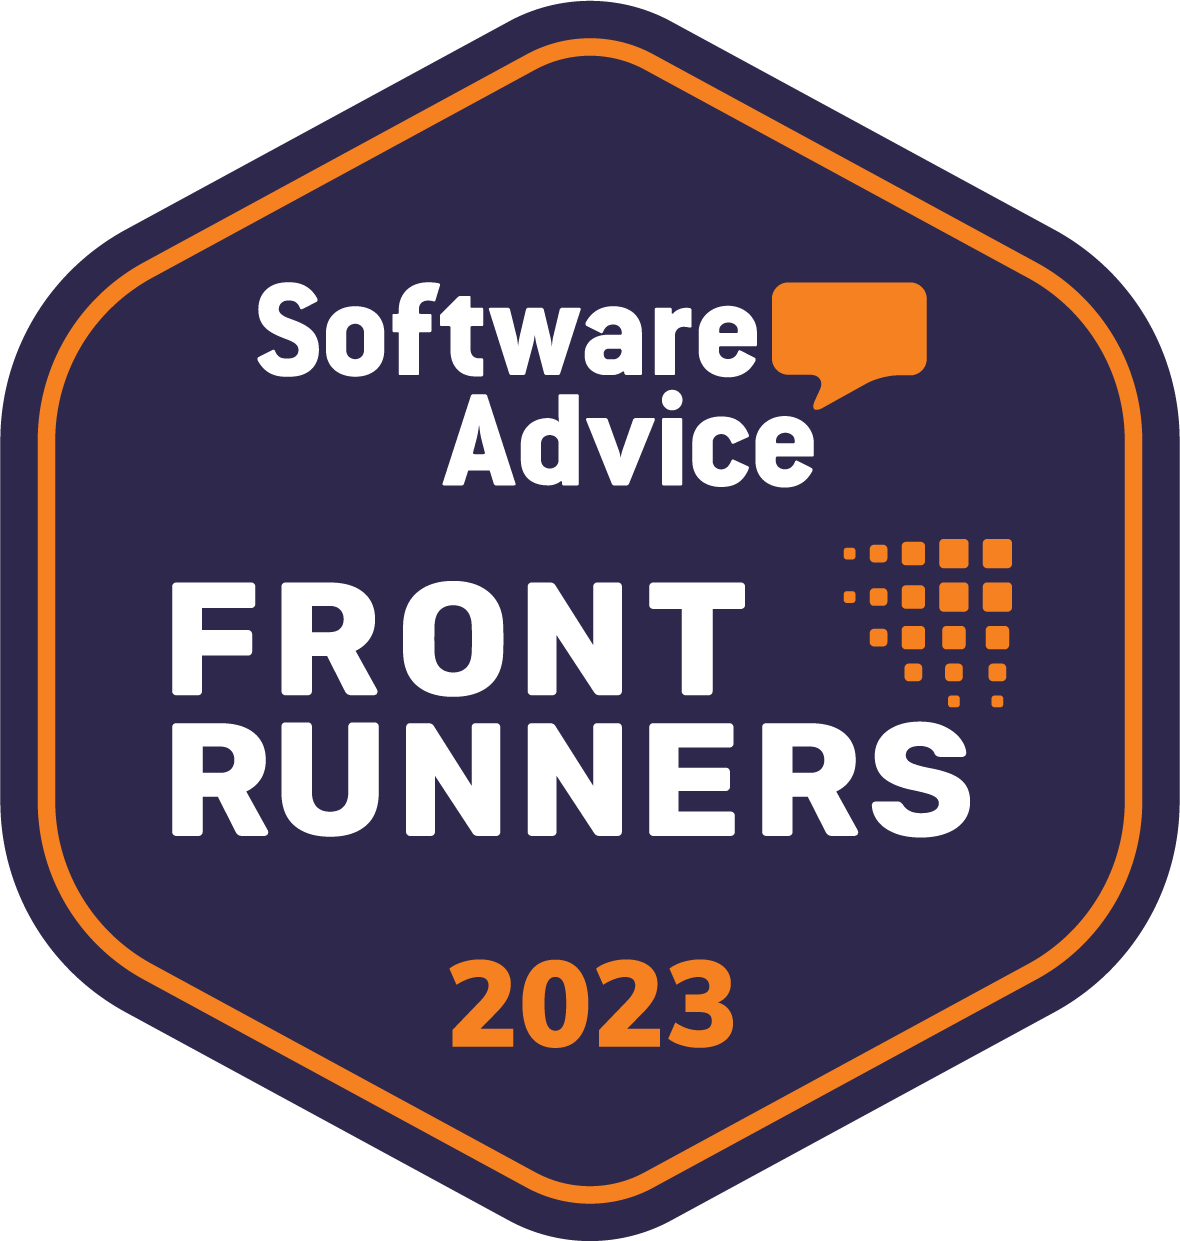 Software Advice Frontrunners badge 2023